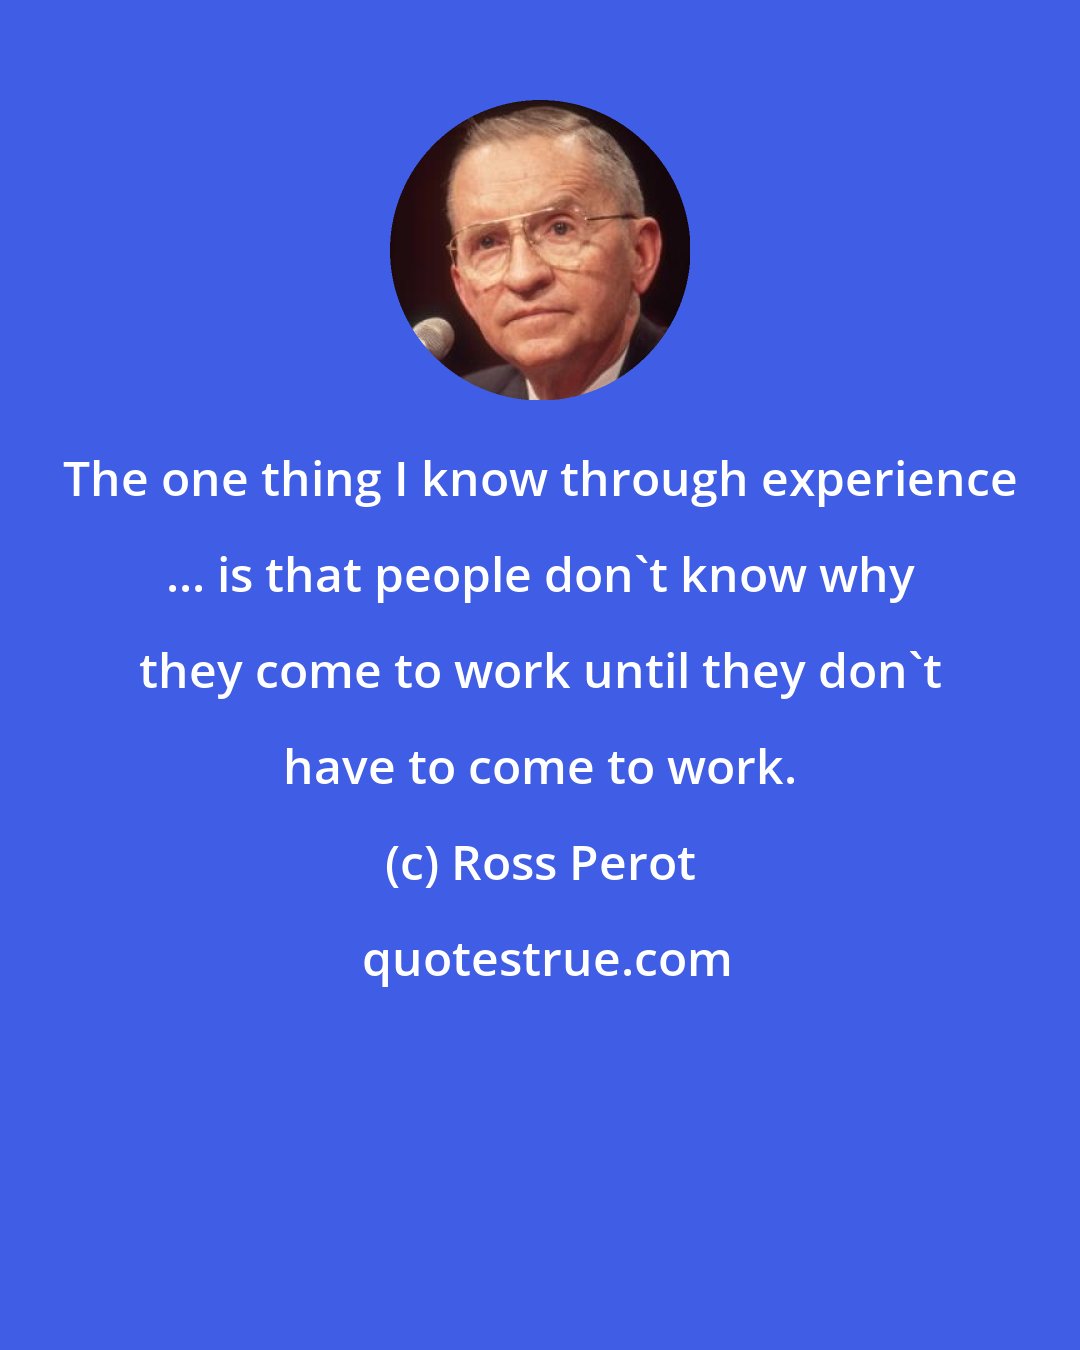 Ross Perot: The one thing I know through experience ... is that people don't know why they come to work until they don't have to come to work.